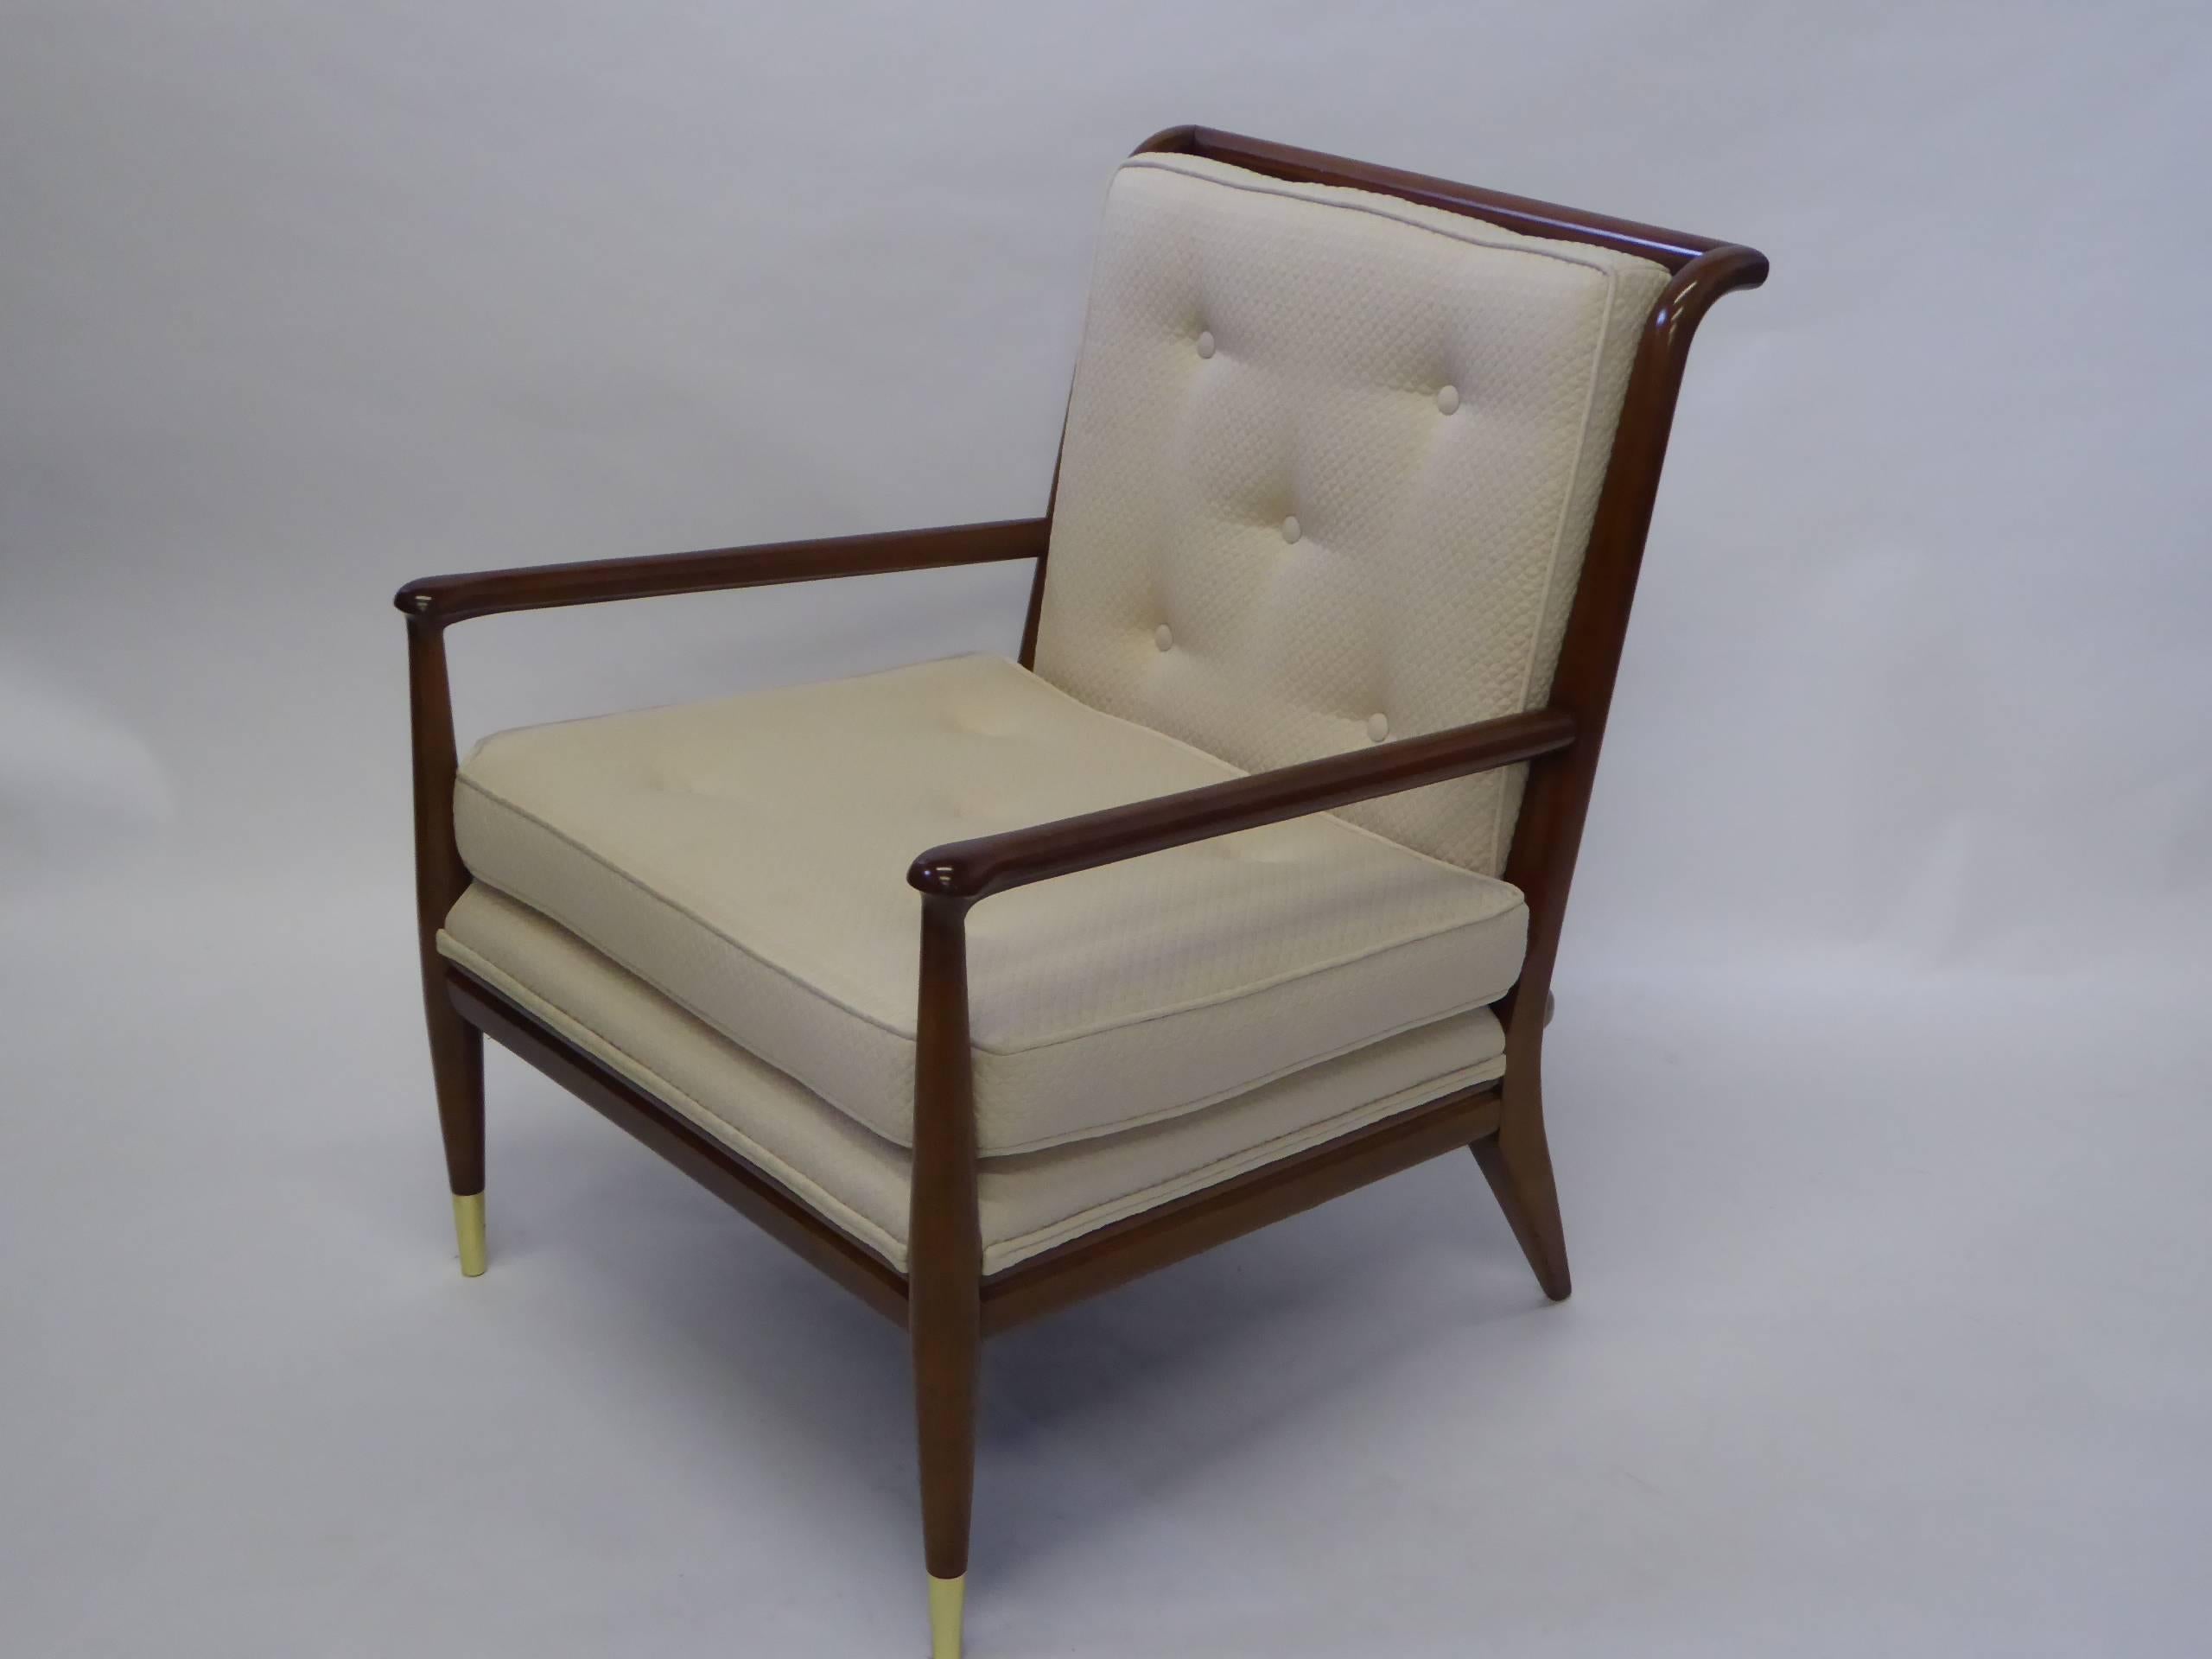 SOLD  Stellar lounge chair from the 1950s, very similar to the work of the superlative firm of Smilow-Thielle. The armchair with railback design with sculpted arms, inset cushions. Restored polished condition with new quilted fabric upholstery.